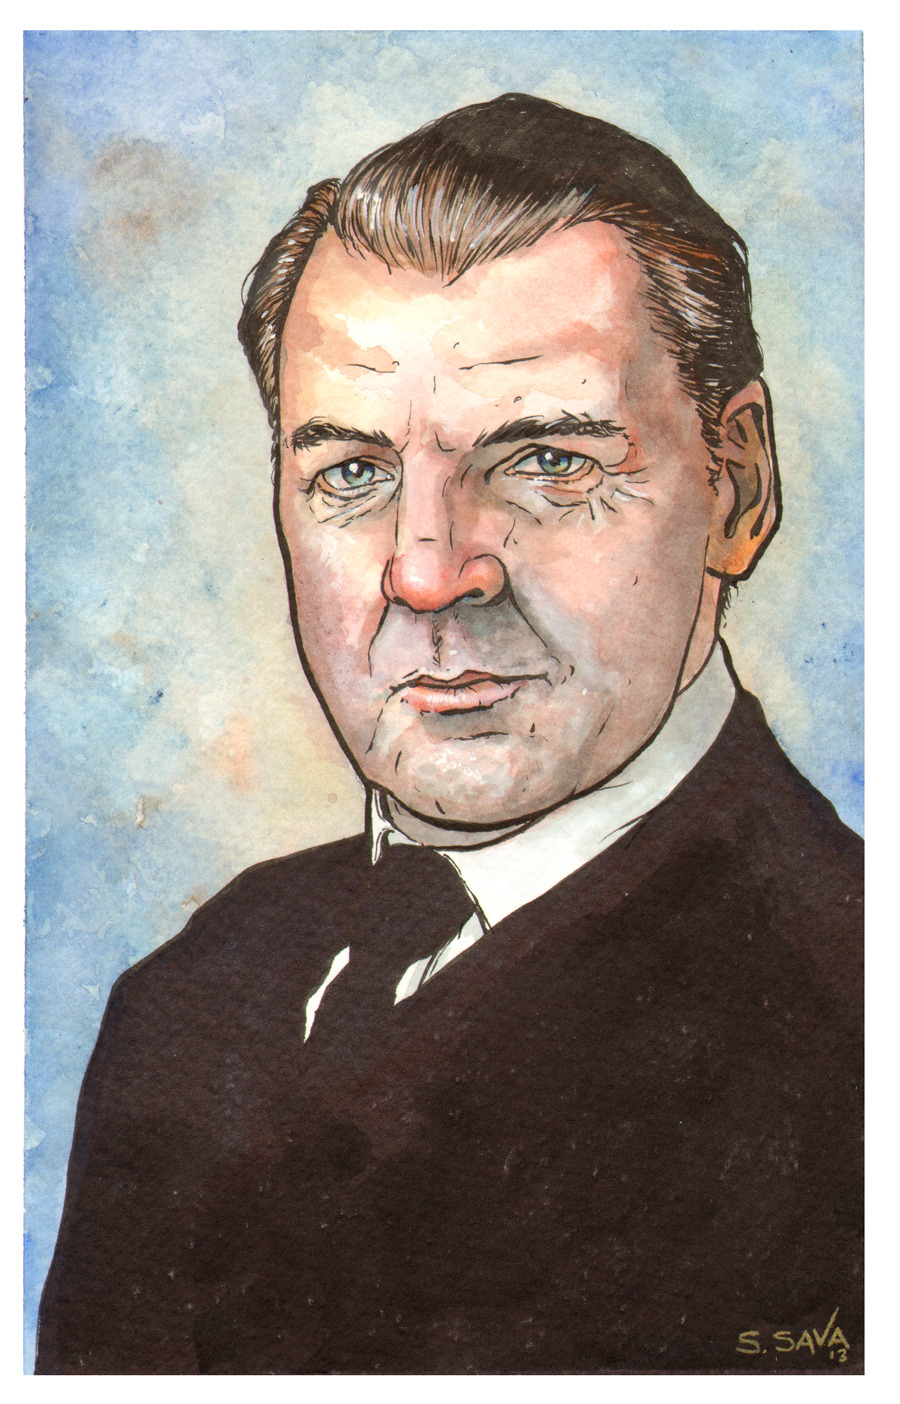 This is my fifth Downton Abbey watercolor painting.About 2 hours.So much fun!Mr. Bates is such a great character.Painting is 6x9 inches on Strathmore Watercolor paper.Done in inks and watercolors.The original painting is for sale here…https://www.etsy.com/listing/124350644/mr-bates-from-downton-abbey-originalThanks</p>
<p>Thank you for the kind words and reblogs!<br />
:)